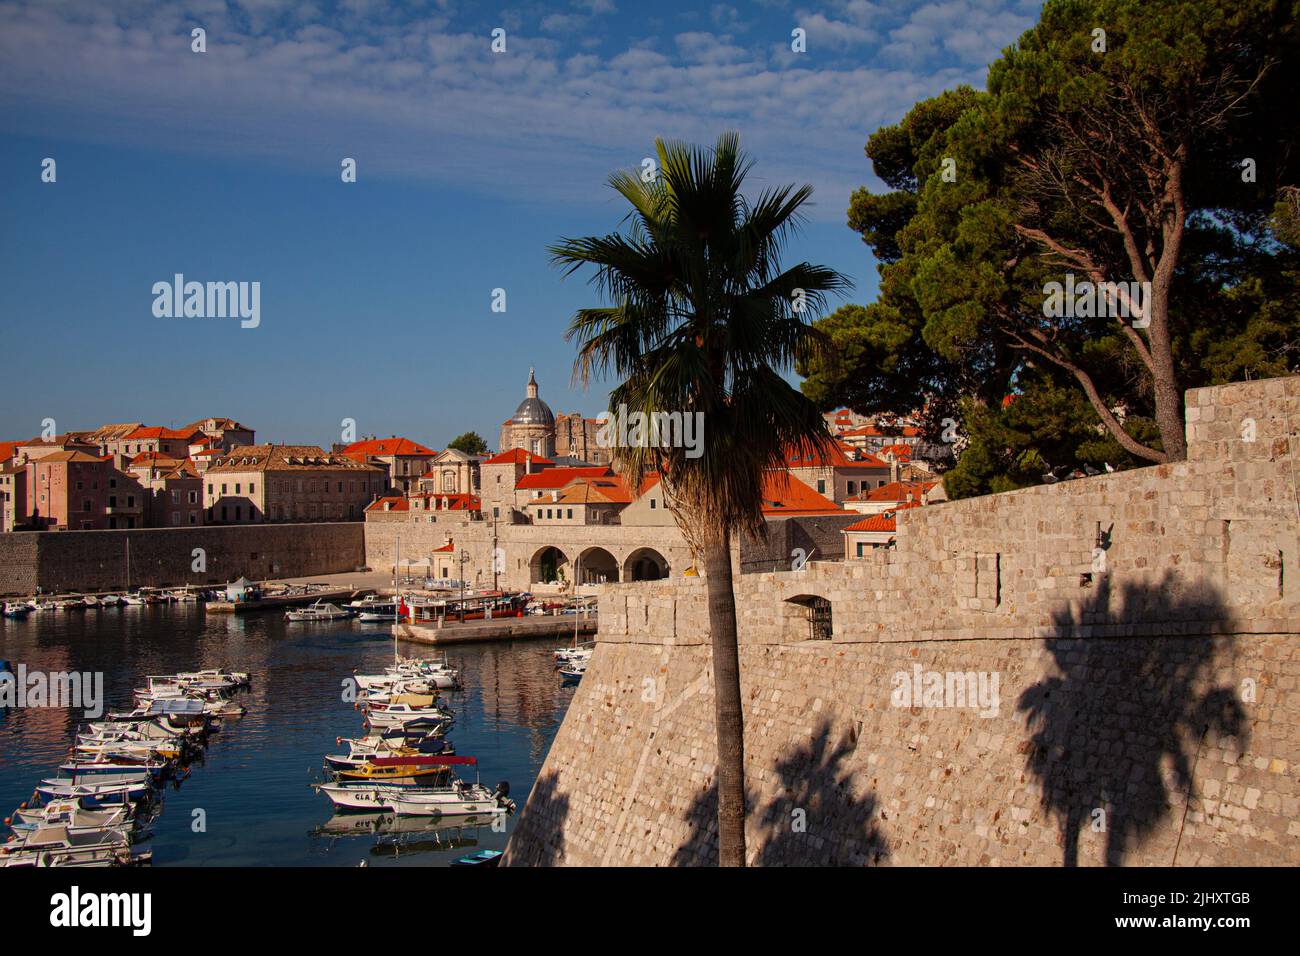 Dubrovnik, Croatia. View over the old town and the historic harbor from the castle with palm trees and blue sky. Stock Photo